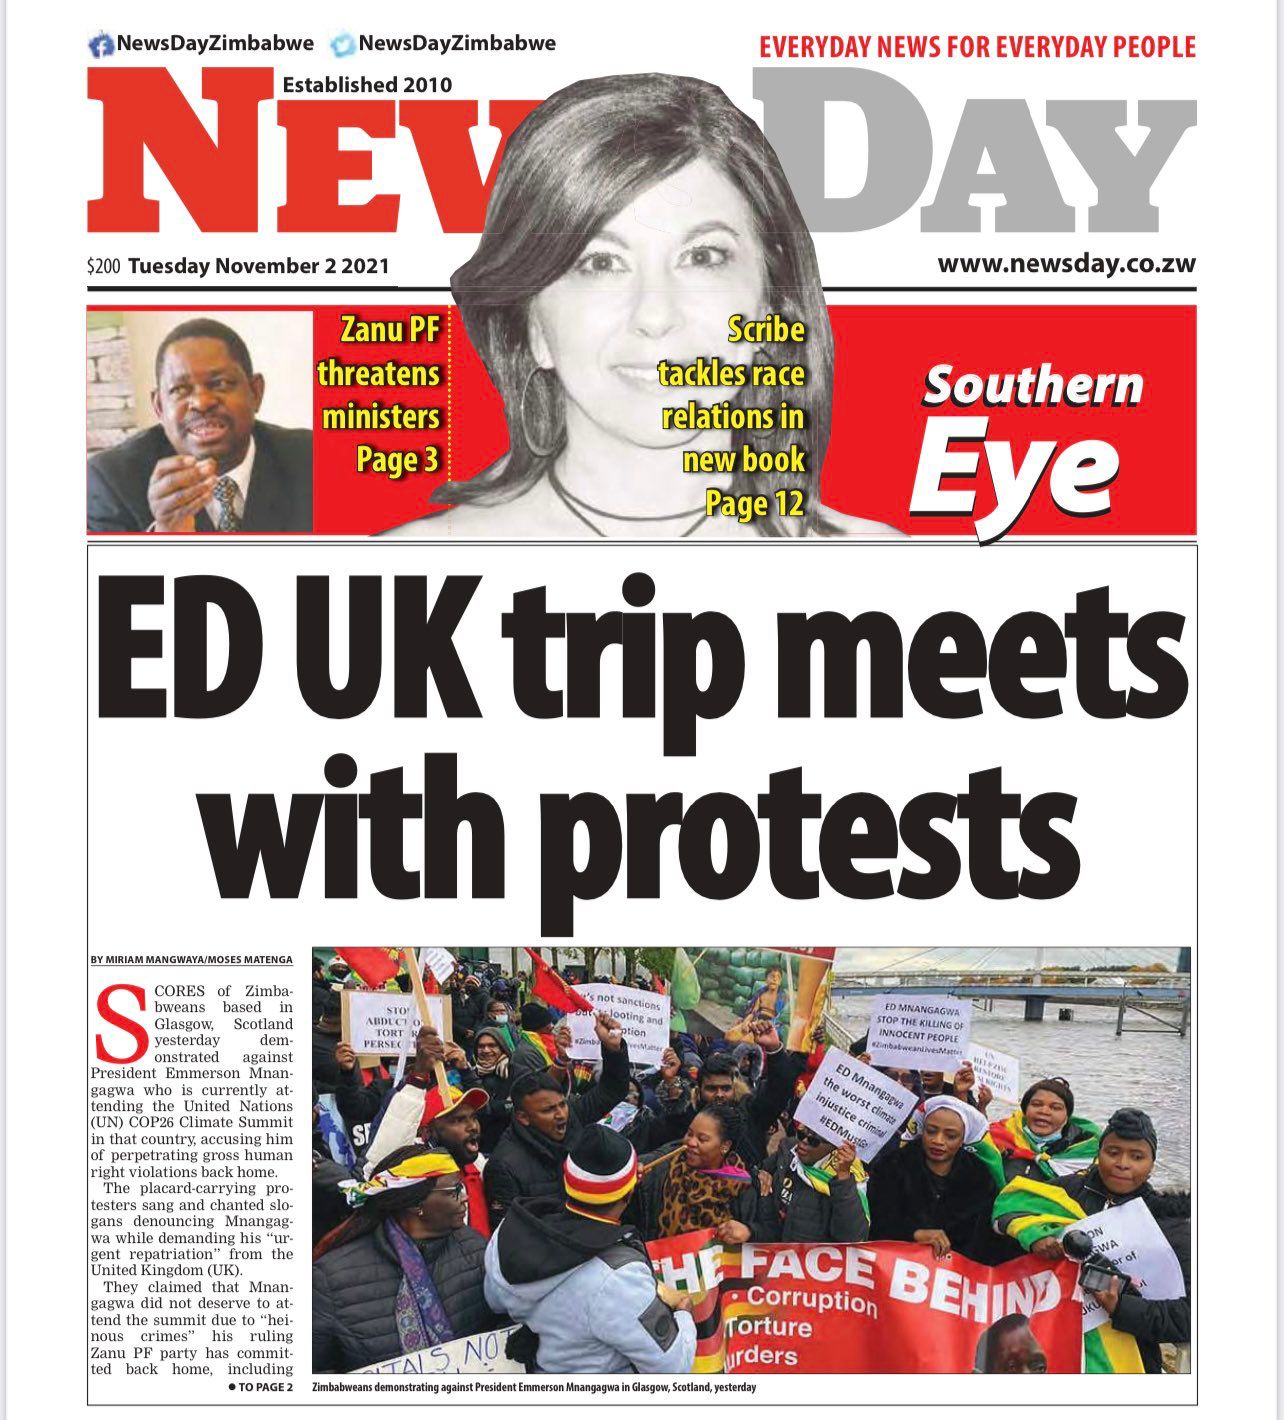 NewsDay reported our Protest at COP26